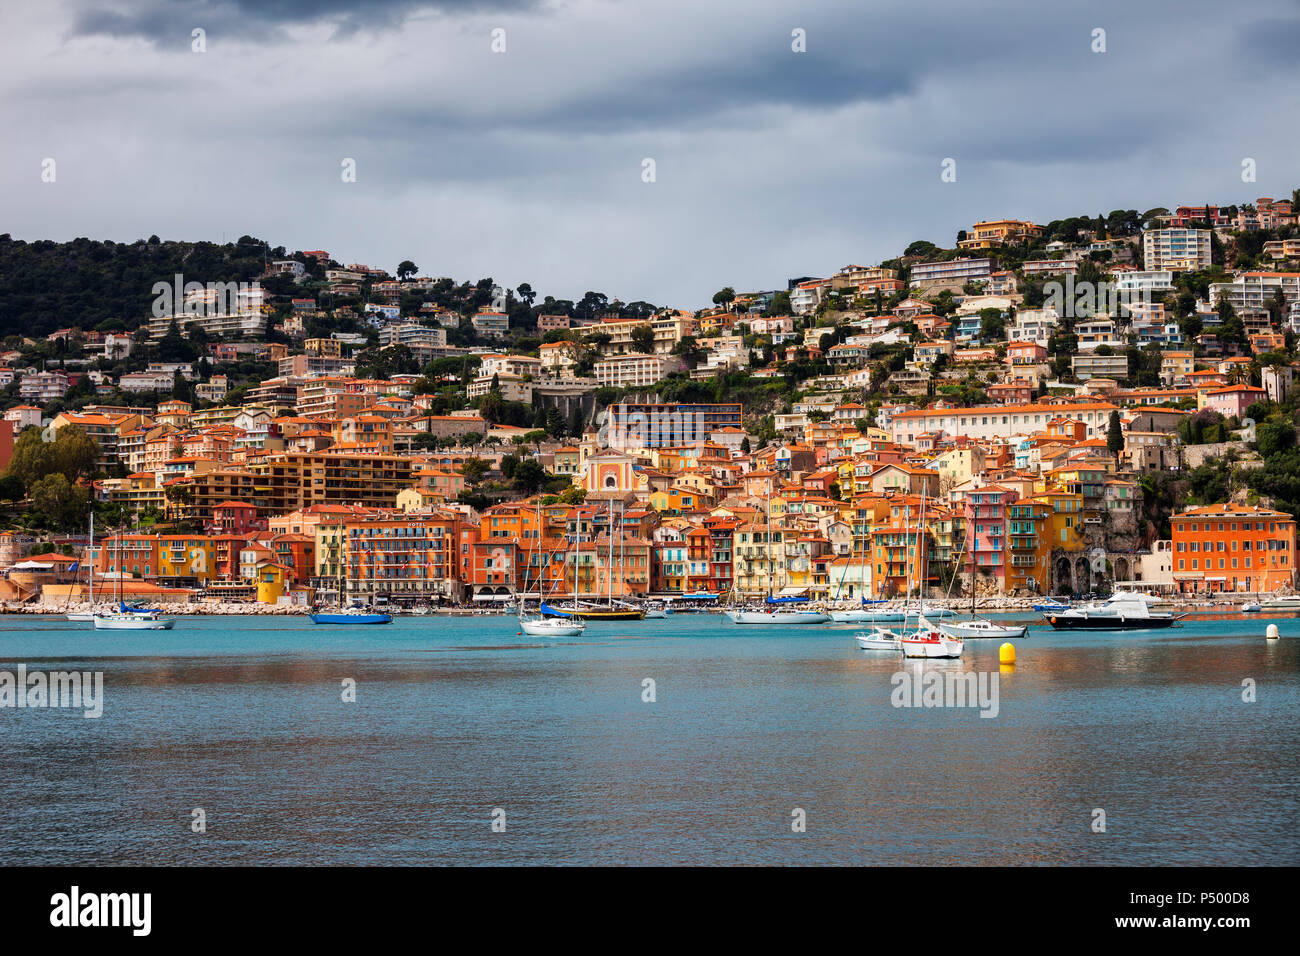 France, French Riviera, Cote d'Azur, Villefranche sur Mer, Old Town at Mediterranean Sea Stock Photo